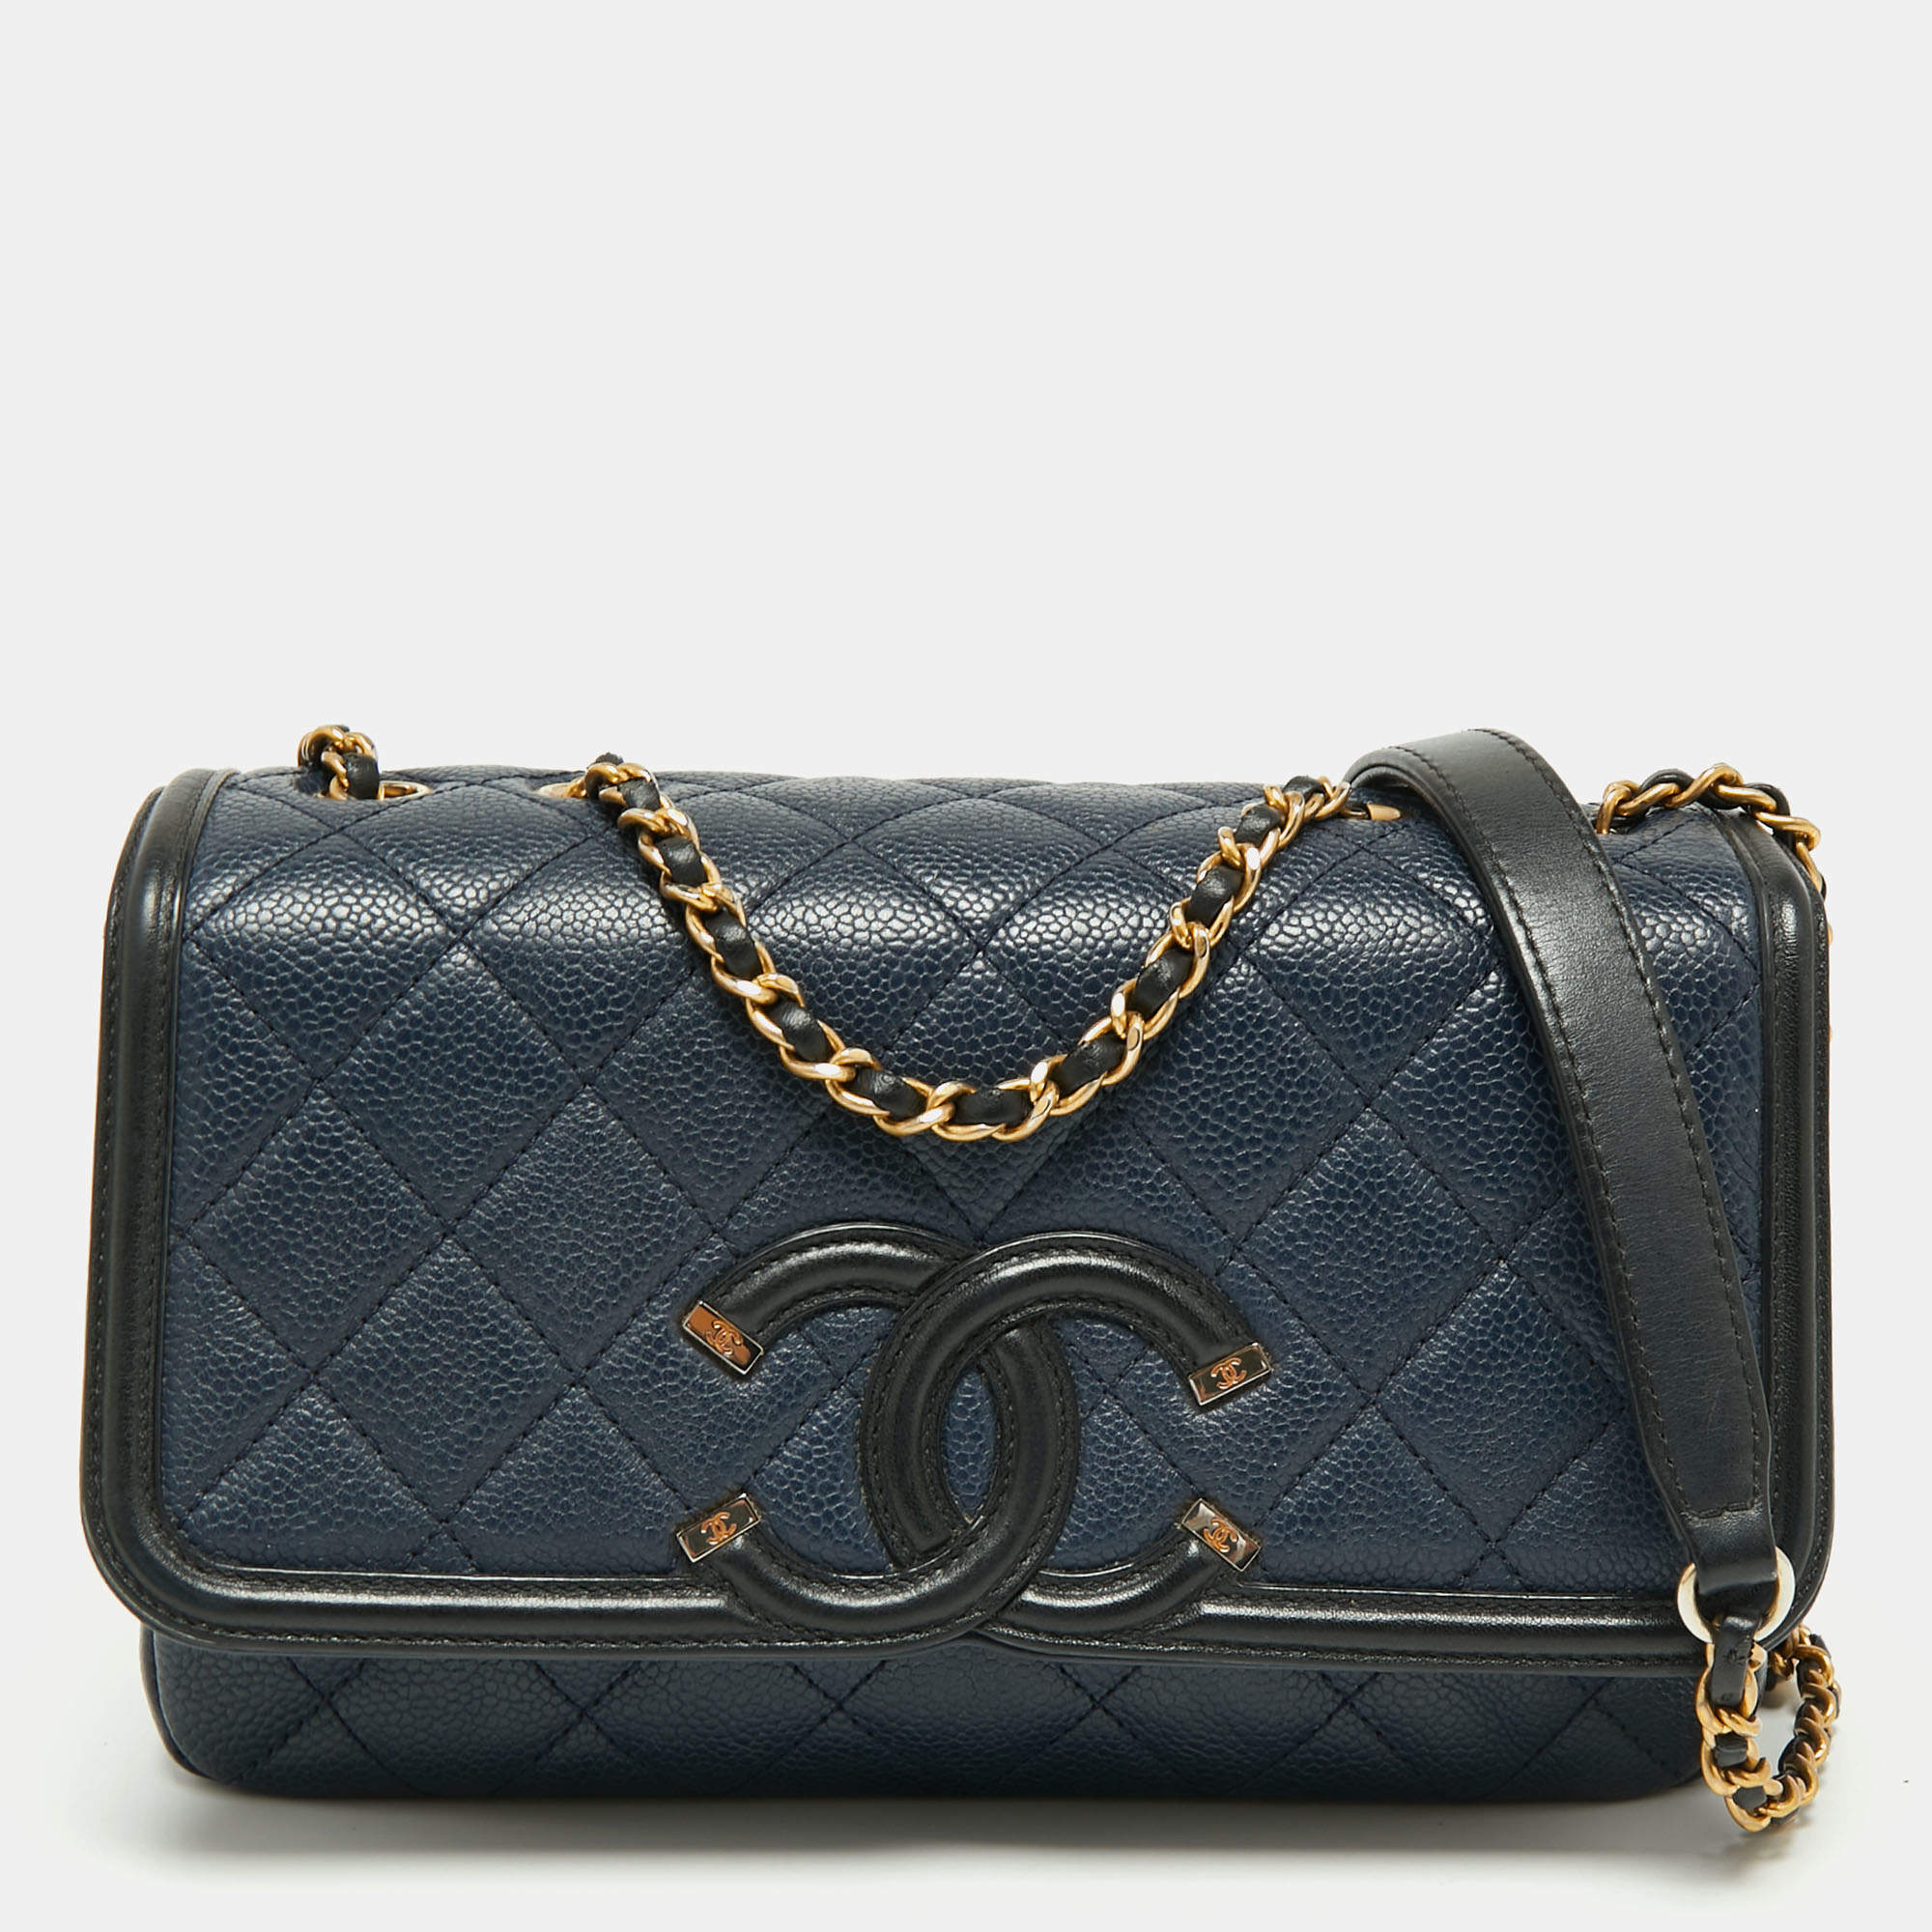 Chanel Blue/Black Quilted Caviar Leather Small CC Filigree Flap Bag